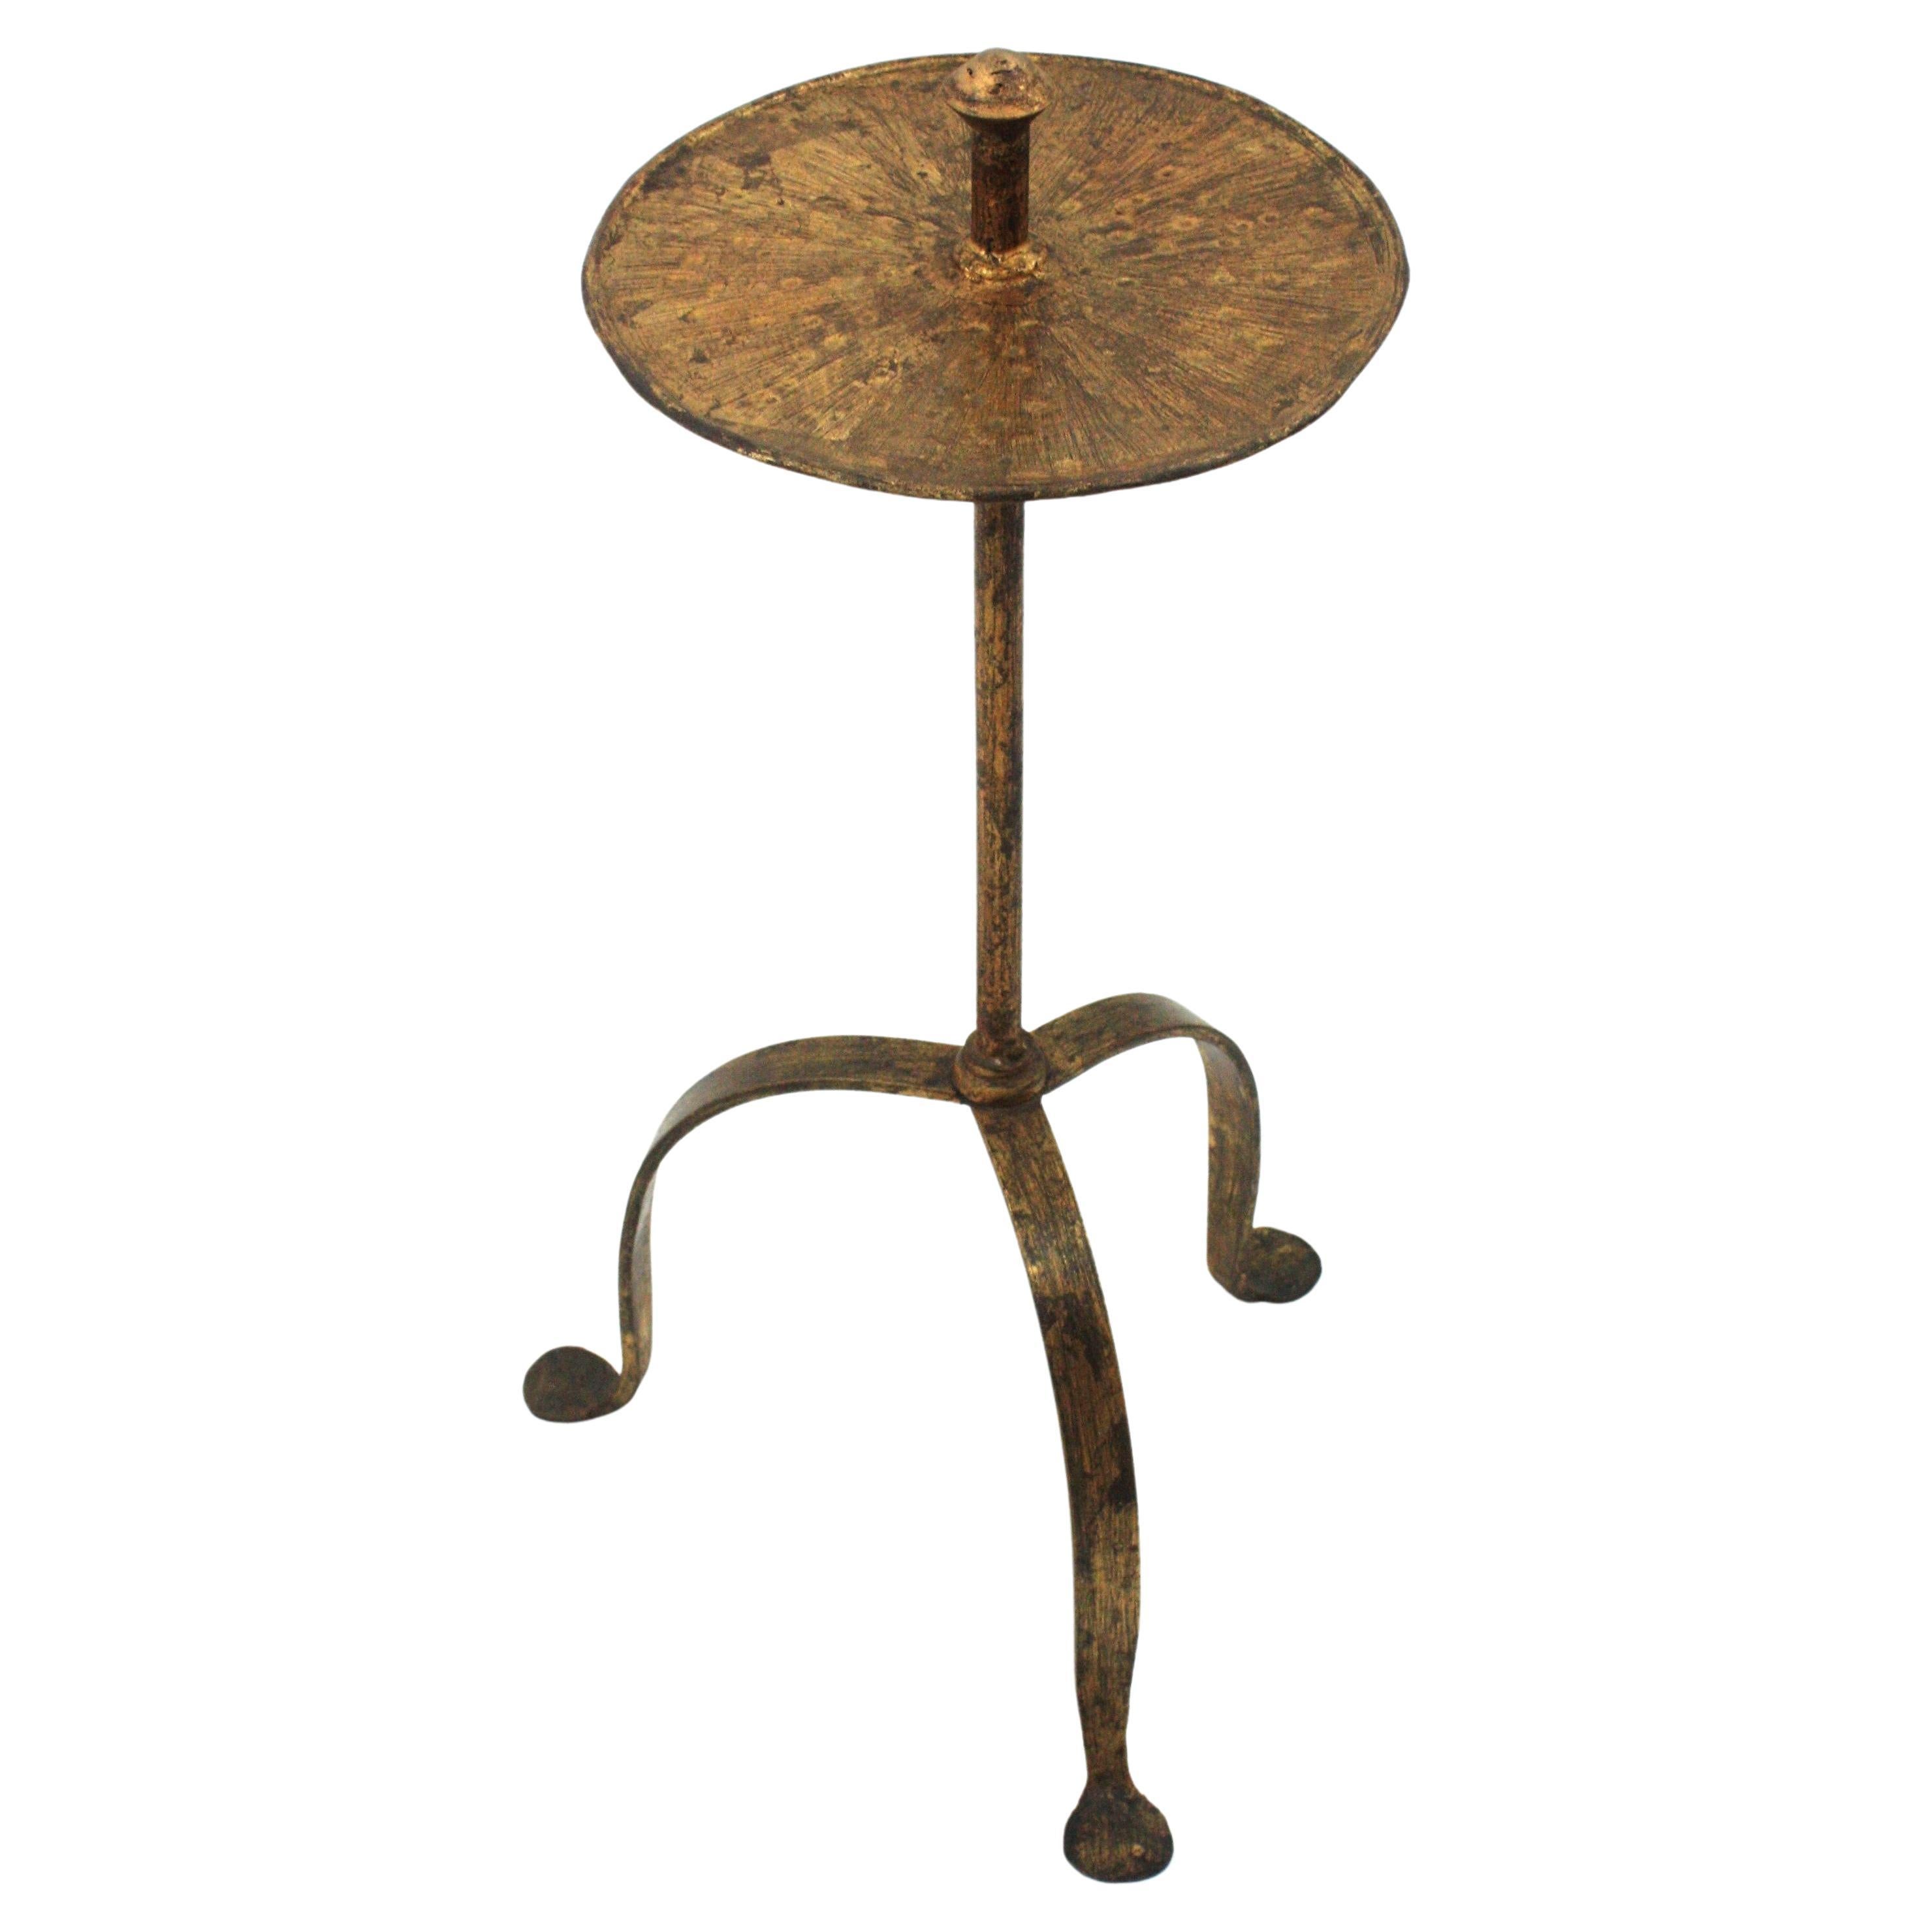 Spanish 1940s Wrought Iron Gilt Drinks Table / Side Table, Handle Detail